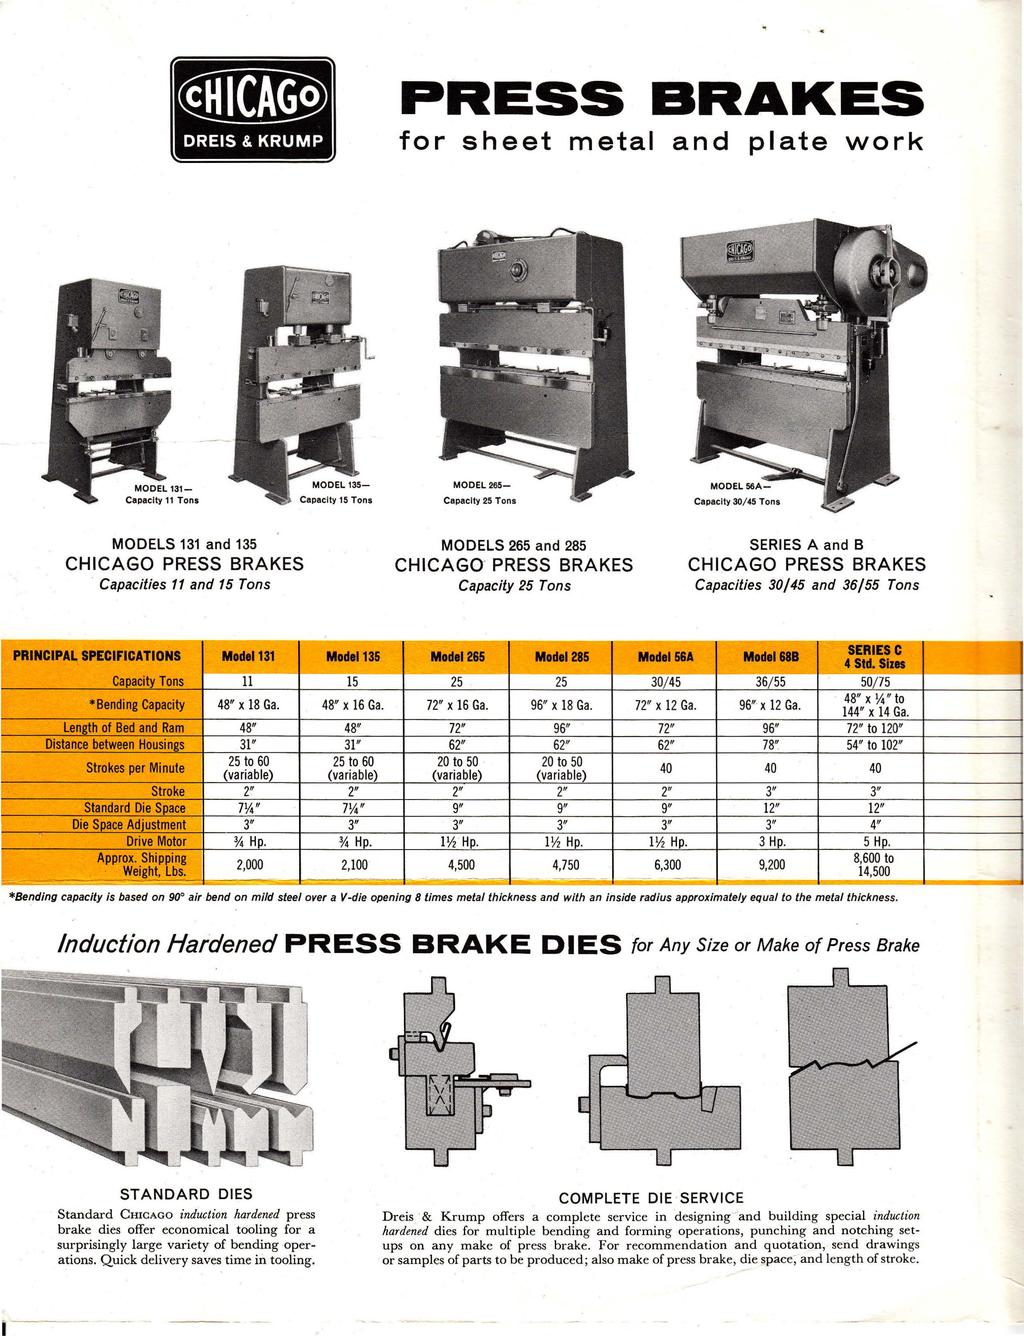 PRESS BRAKES for sheet metal and plate work Capacity 30/ 45 Tons MODELS 131 and 135 Capacities 11 and 15 Tons MODELS 265 and 285 Capacity 25 Tons SERIES A and B Capacities 30/45 and 36/55 Tons